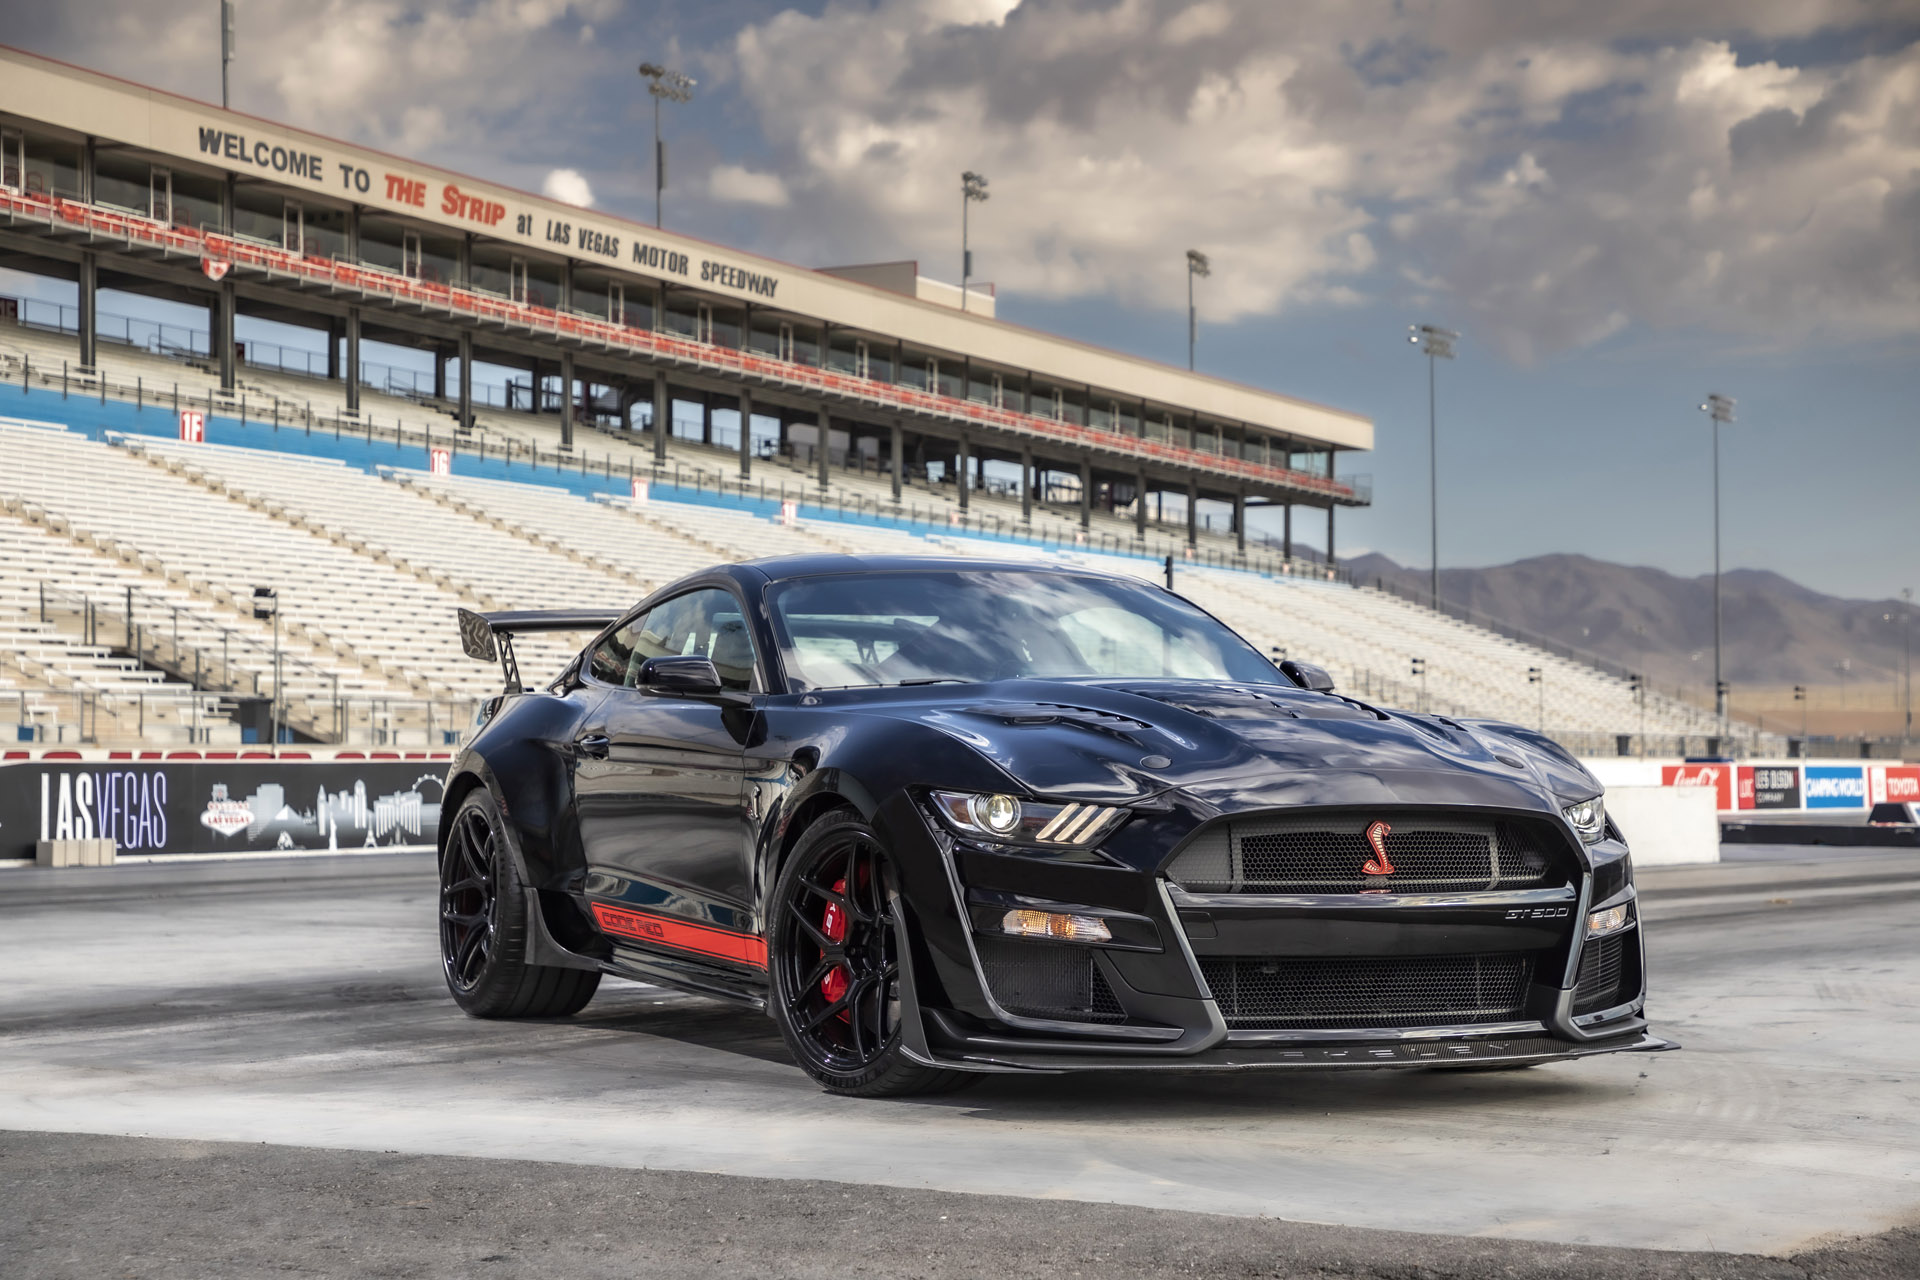 Shelby Code Red is a 1,300hp, twinturbocharged Ford Mustang GT500